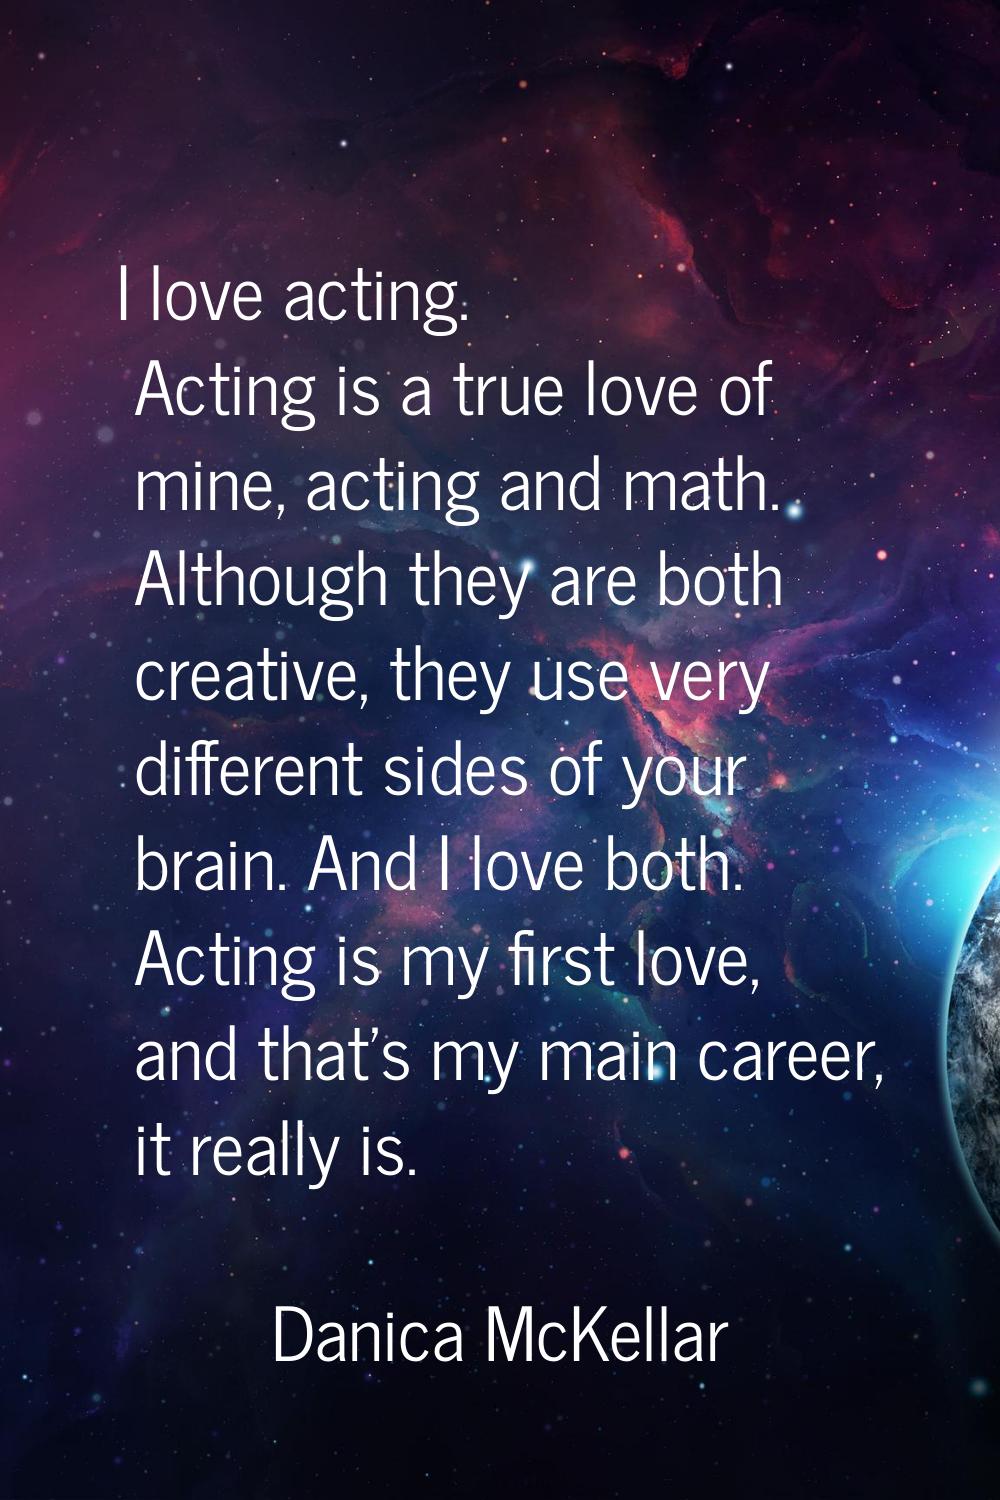 I love acting. Acting is a true love of mine, acting and math. Although they are both creative, the